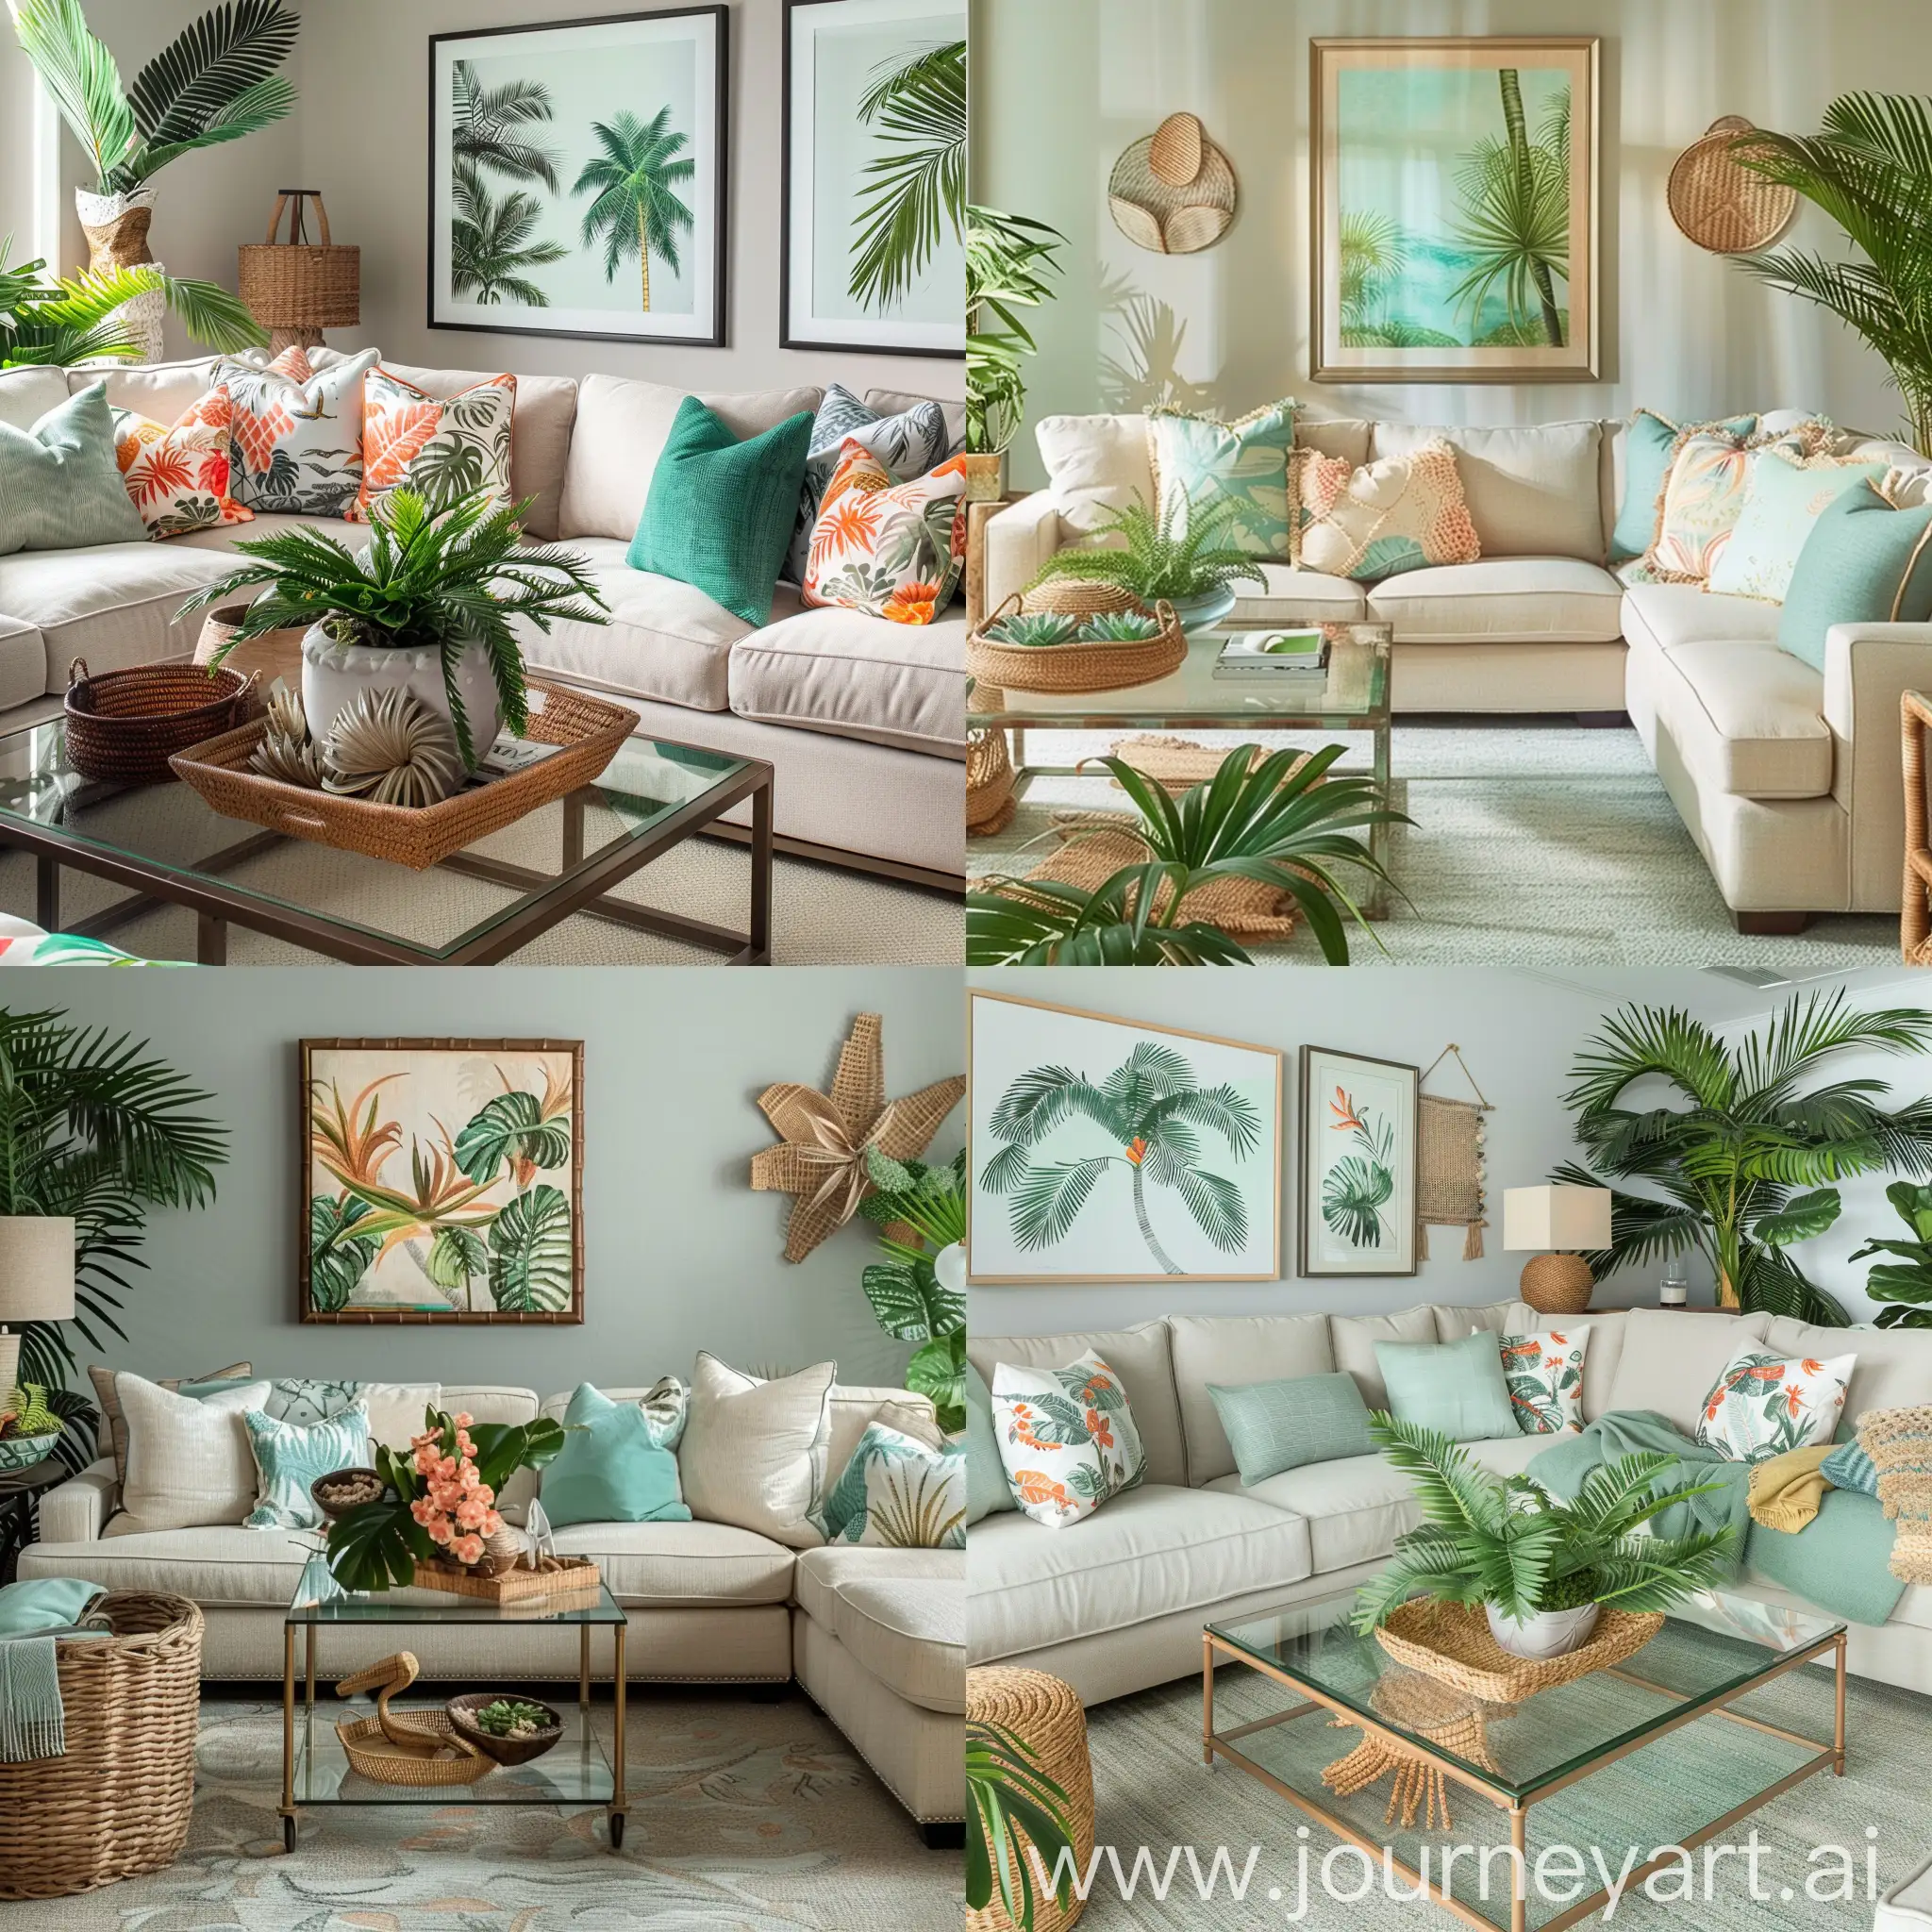 "Generate images of a tropical modern living room that blends sleek contemporary design with lush greenery and natural elements. Incorporate a neutral color scheme with pops of tropical colors like teal or coral. Integrate indoor plants such as palm trees, ferns, and orchids to bring a tropical vibe indoors. Choose furniture with clean lines and natural materials like rattan or bamboo, such as a sectional sofa with light-colored upholstery and a glass-top coffee table. Enhance the space with decorative elements inspired by the tropics, such as woven baskets, textured throw pillows, and artwork featuring tropical motifs like palm leaves or exotic birds."